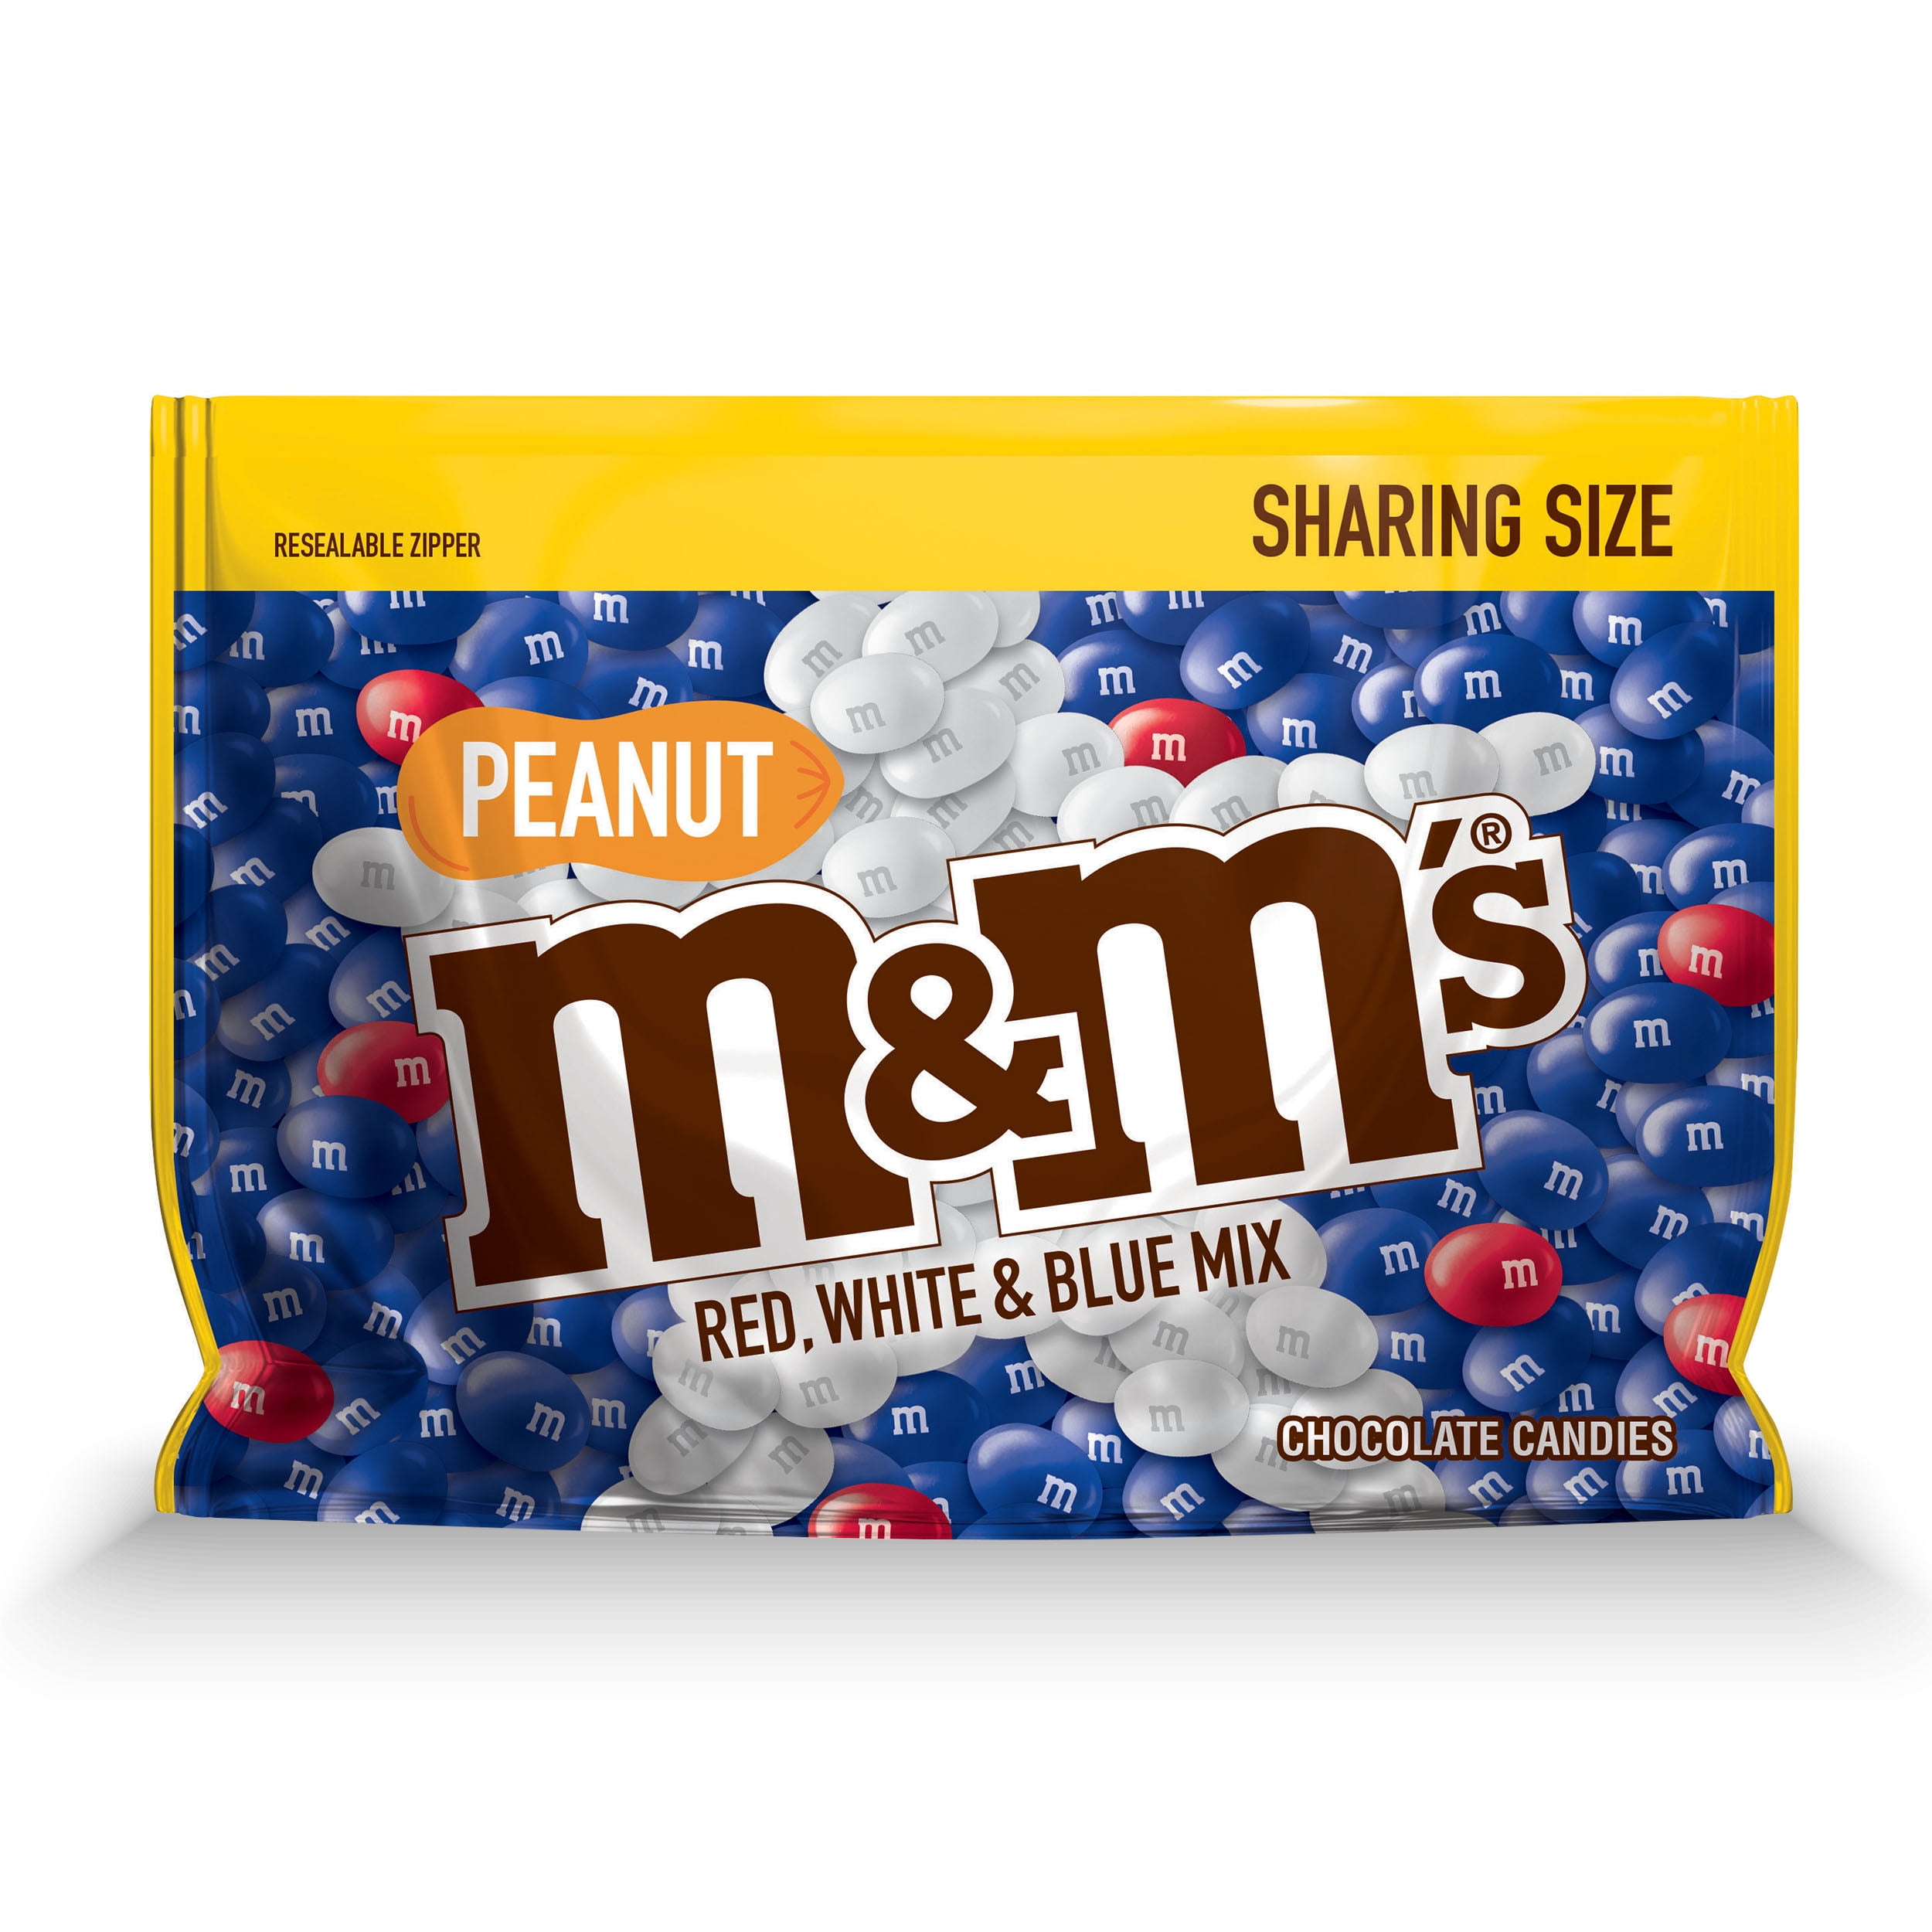 M&M's Sharing Size Red, White & Blue Mix Peanut Butter Chocolate